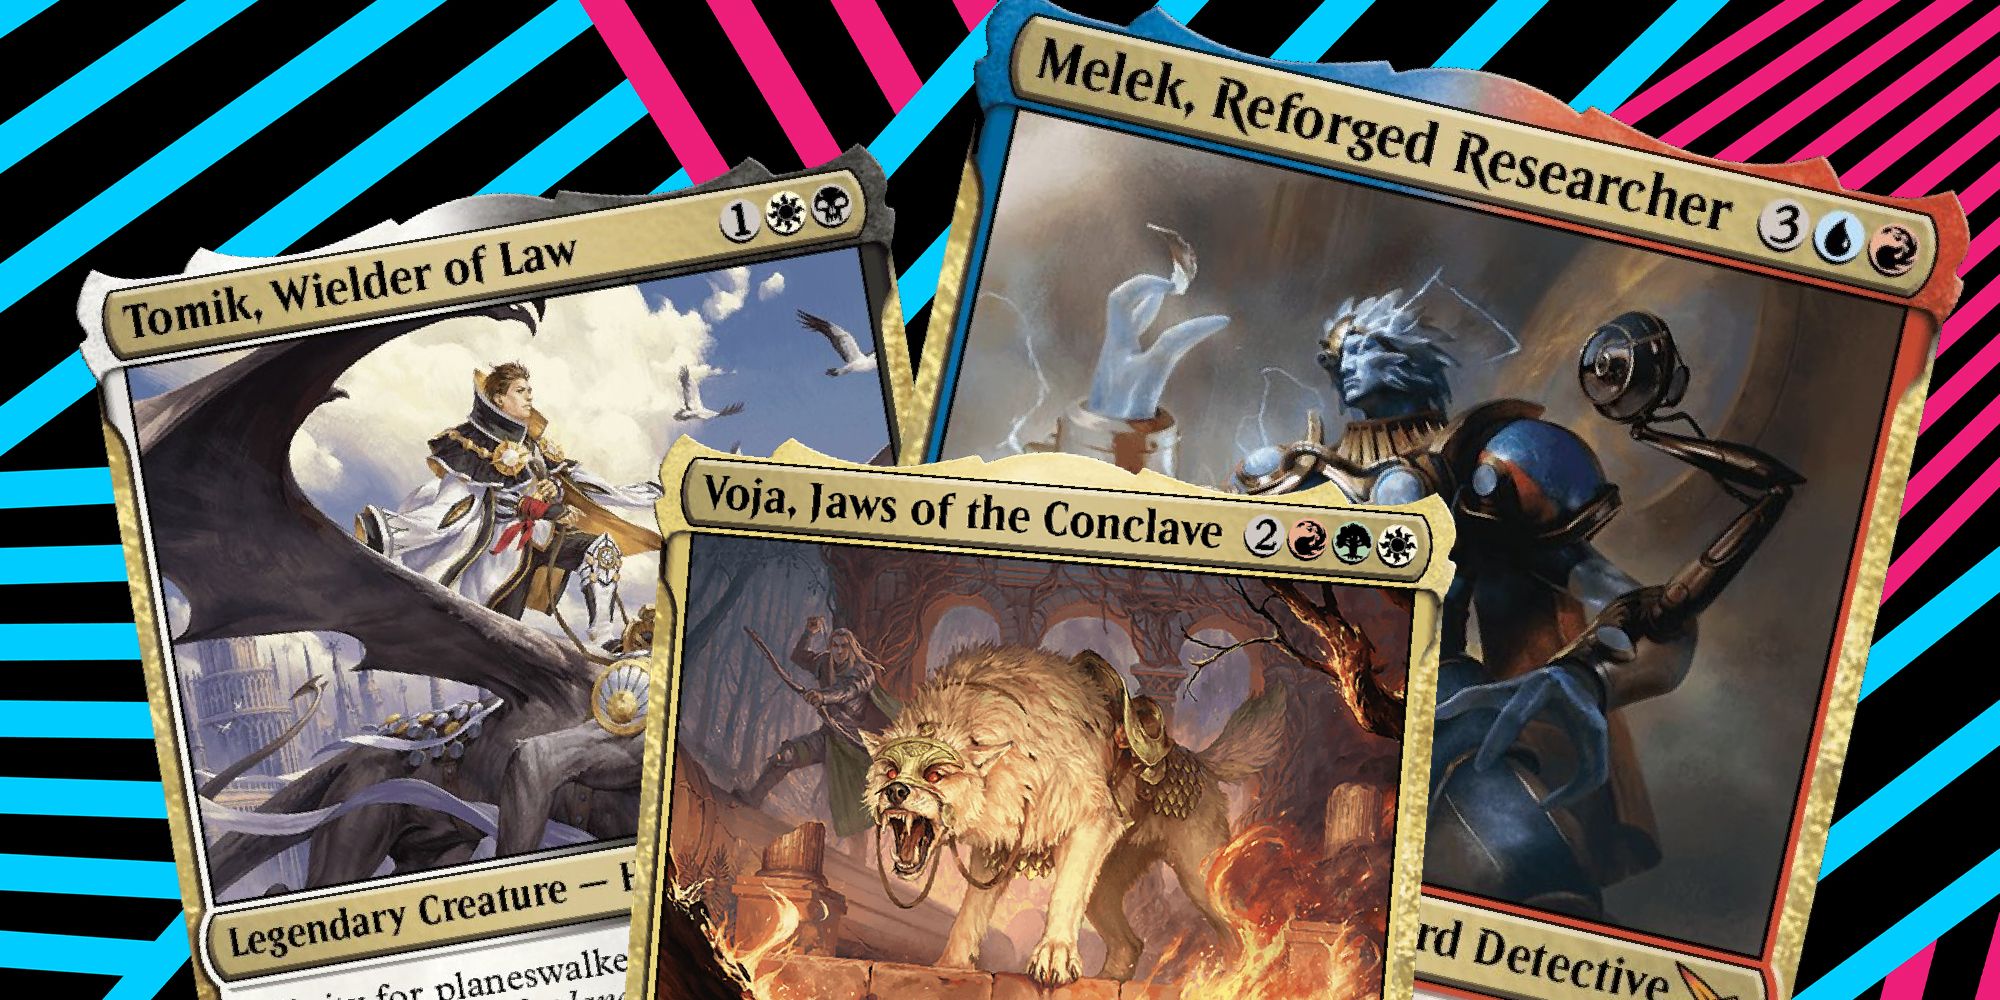 Tomik Wielder of Law, Voja Jaws of the Conclave, and Malek Reforged Researcher MTG cards over blue and pink lines on a black background